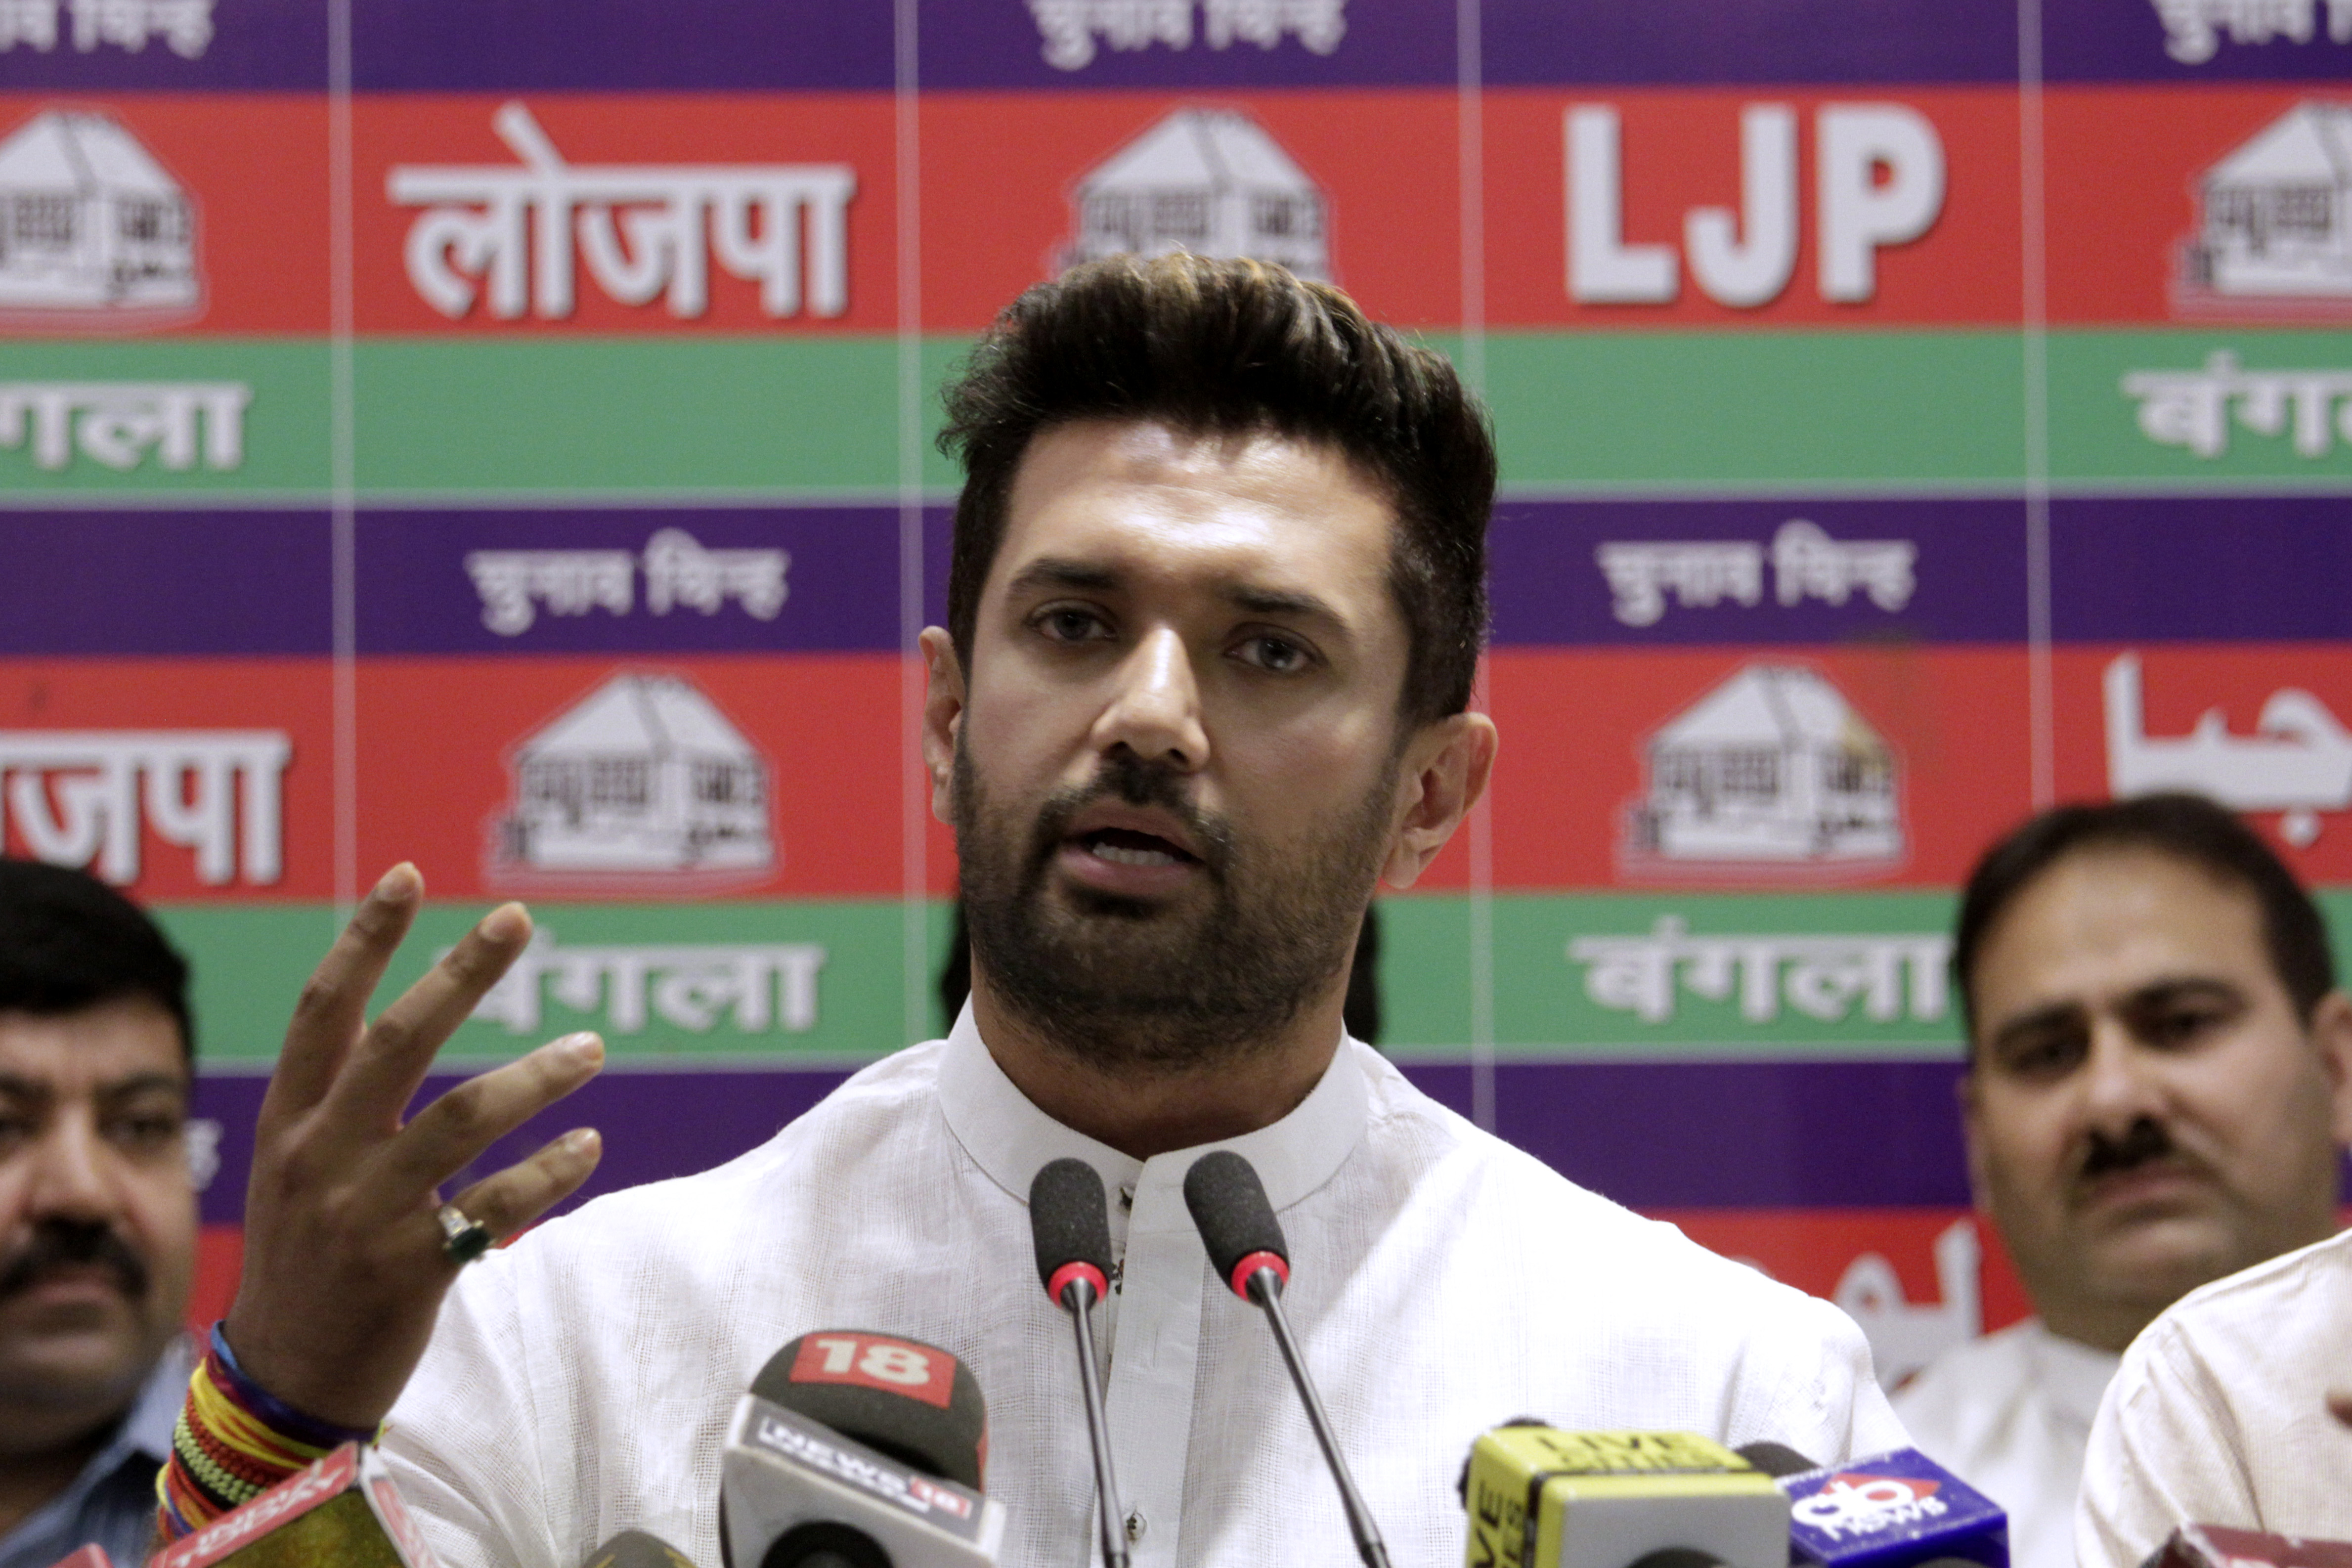 Maha CM assured me names coming up in Sushant case will be questioned: Chirag Paswan